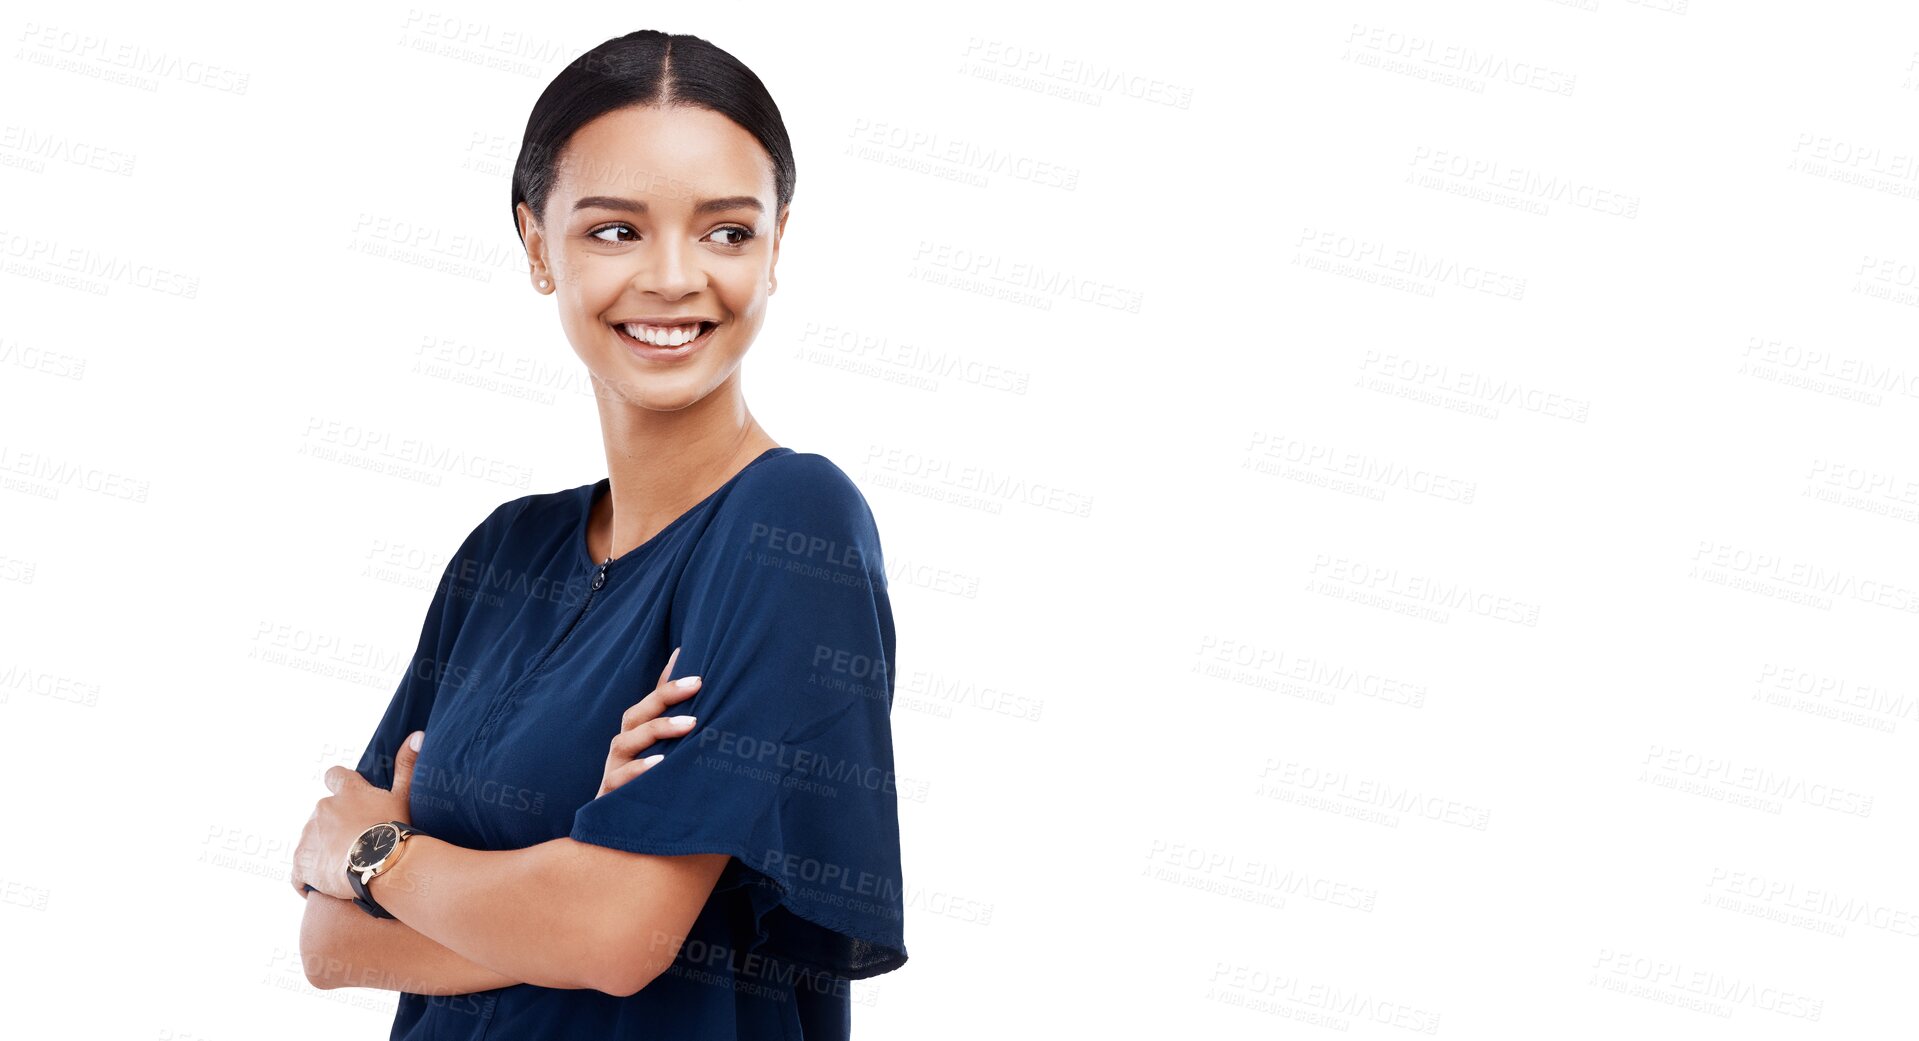 Buy stock photo Business, woman and arms crossed with smile or thinking in png or isolated and transparent background with secretary. Confident, happy and face with professional female with  vision and idea.